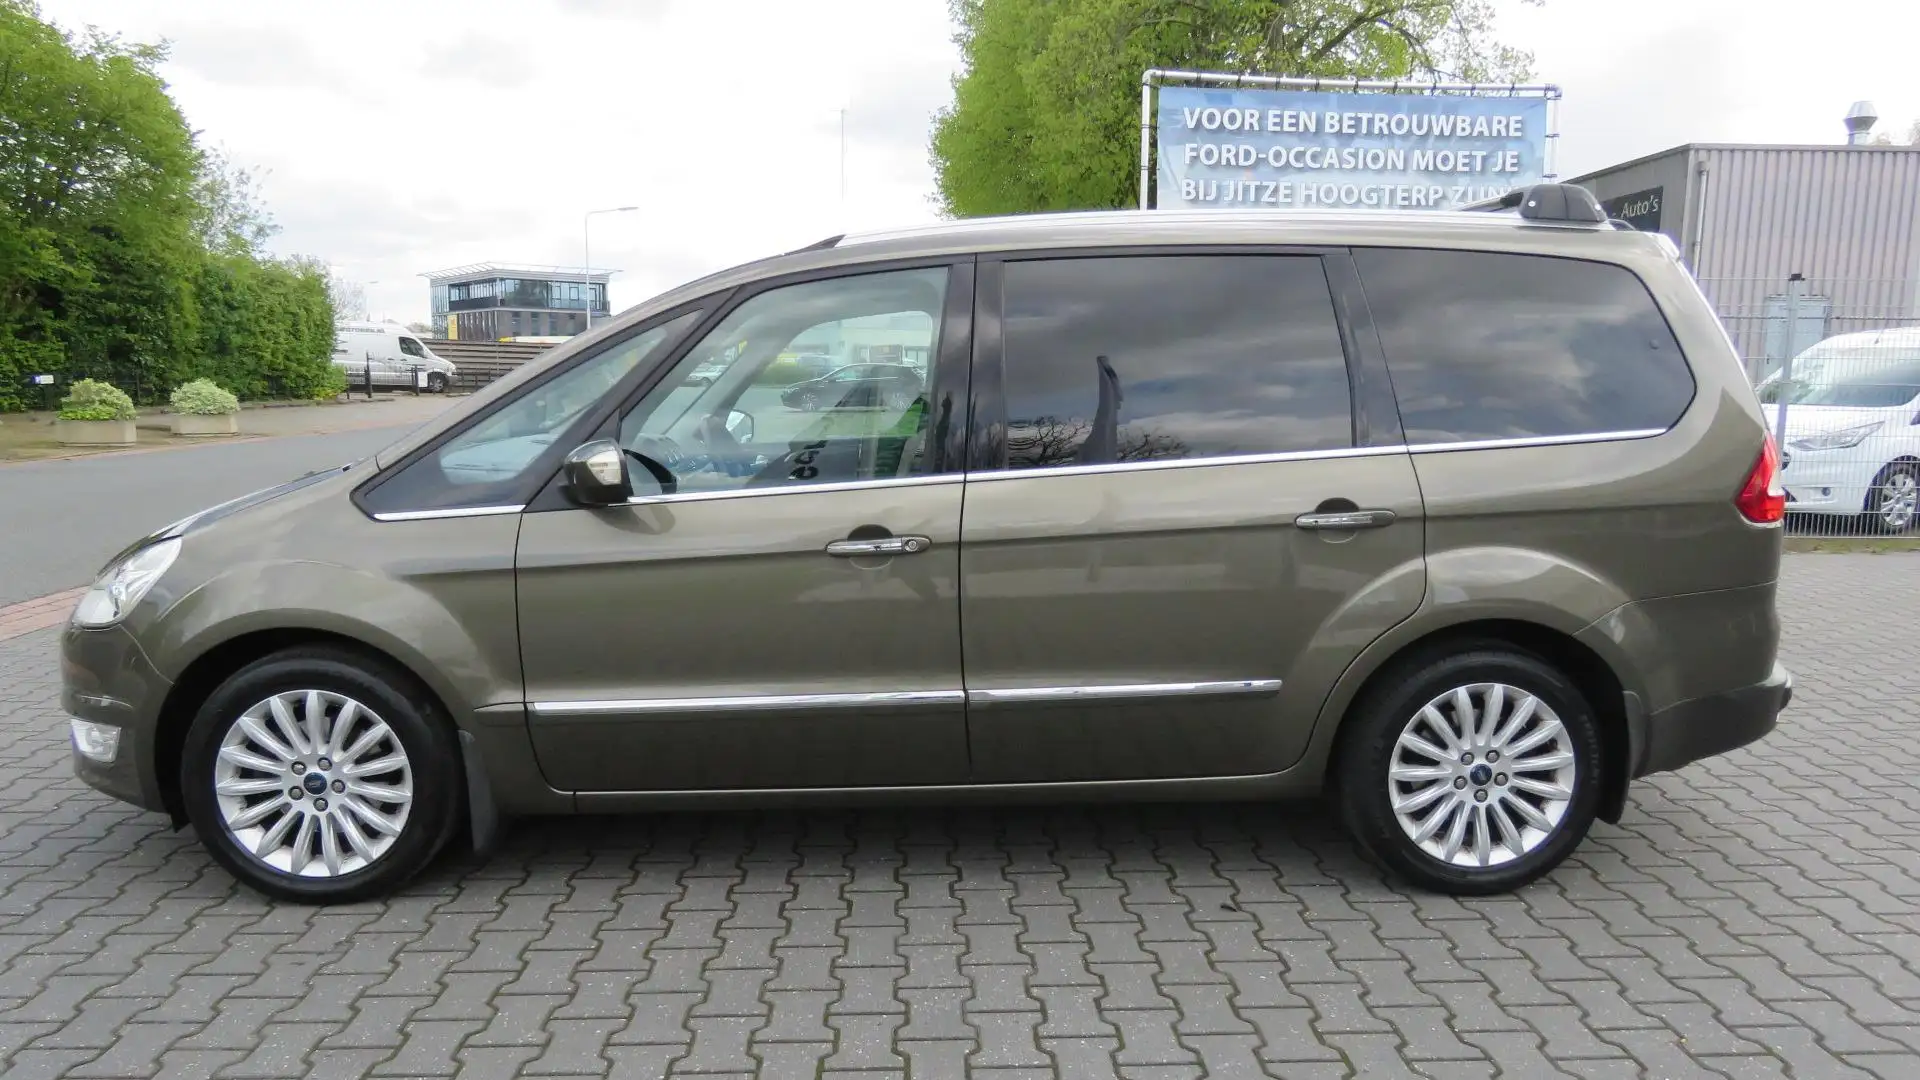 Ford Galaxy 2.0 Titanium 7 pers., Navigatie, PDC, Cruise, deal zelena - 2